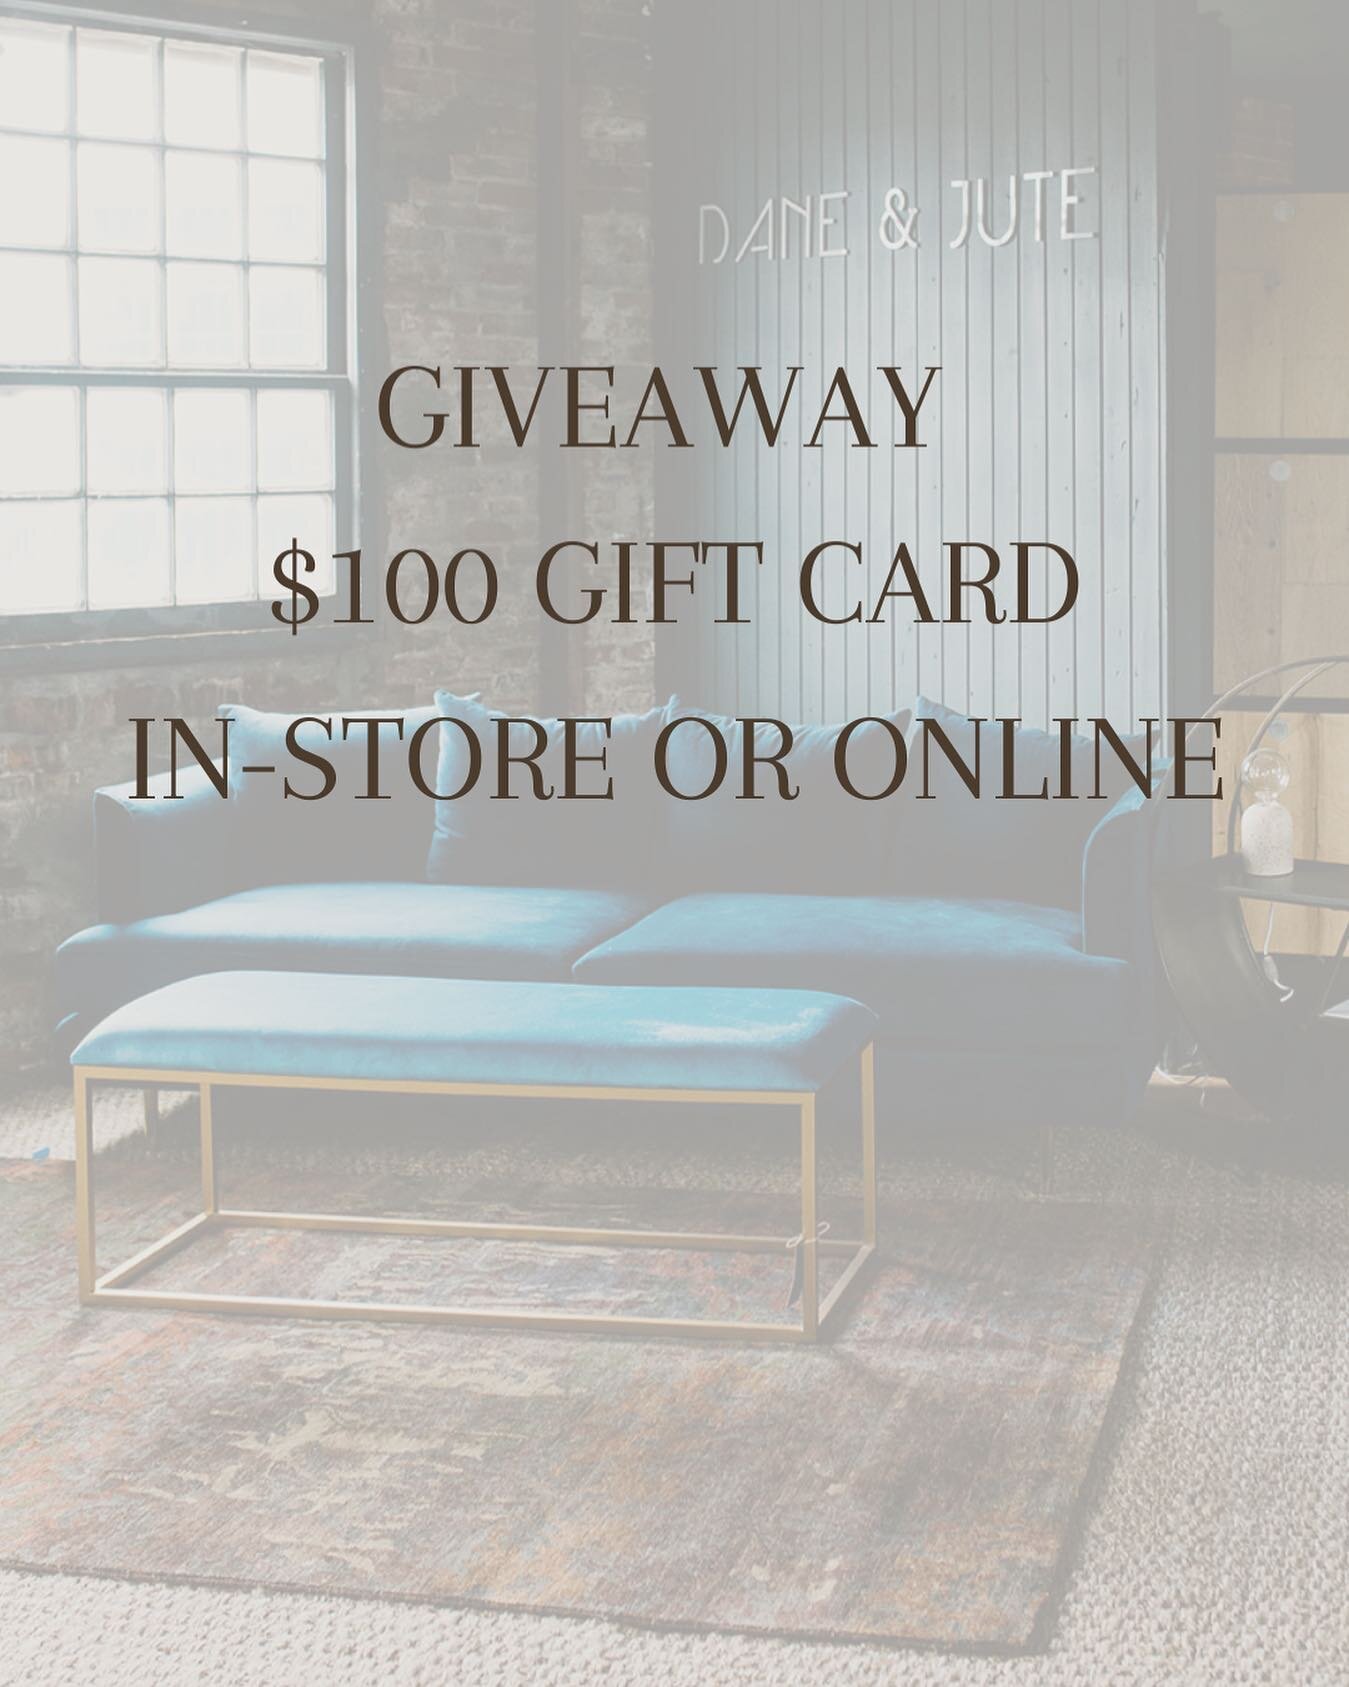 GIVEAWAY! 🎁 
Win a $100 gift card to the shop, in store or online.
TO ENTER:
1. Make sure you&rsquo;re following @daneandjute 
2. Tag a friend (one tag = one entry)
3. Share to your stories and tag us ! 

Ends Monday at 5pm, winner will be announced